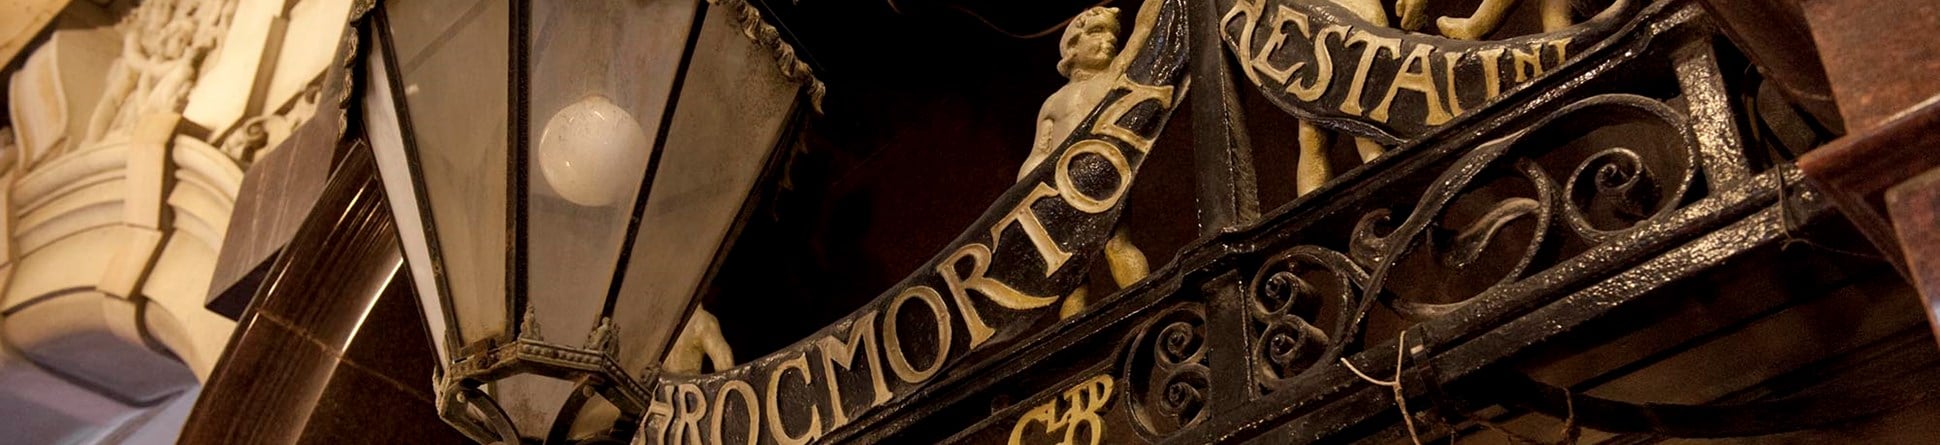 Detail of the signage for J Lyon's Throgmorton Restaurant and street lamp